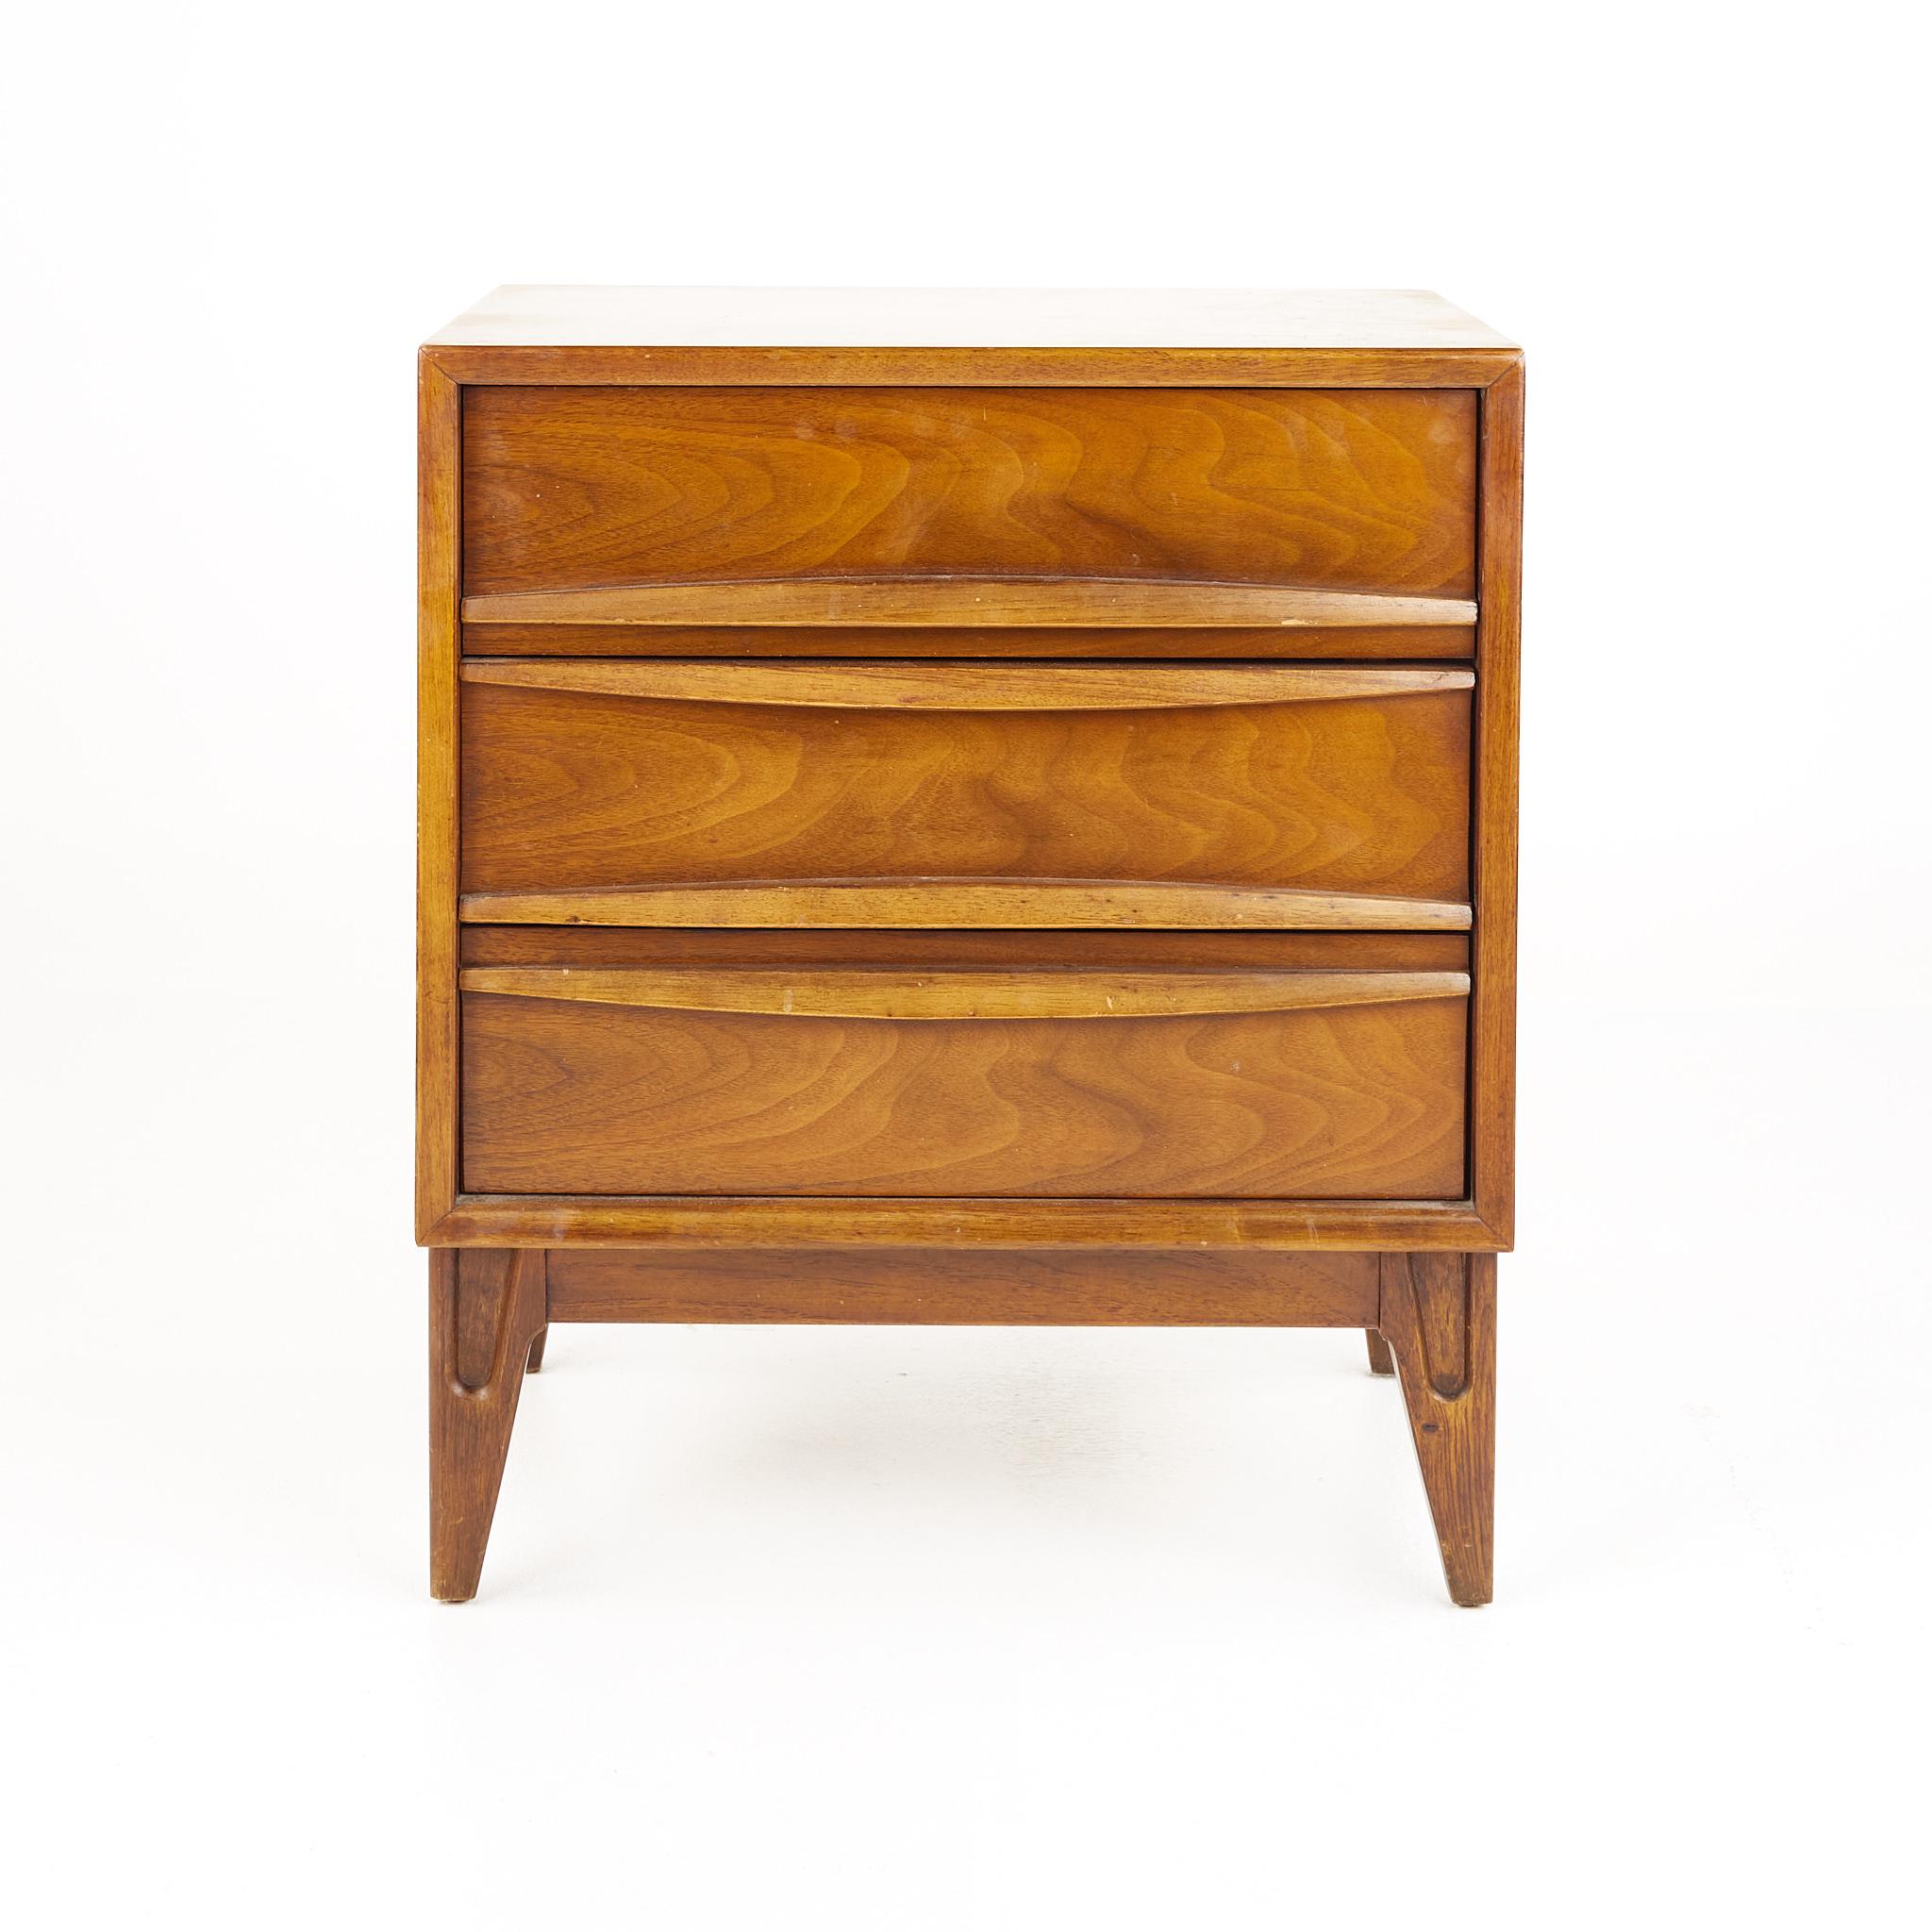 Thomasville Tiki Brutalist mid century walnut nightstand

This nightstand measures: 20.5 wide x 15 deep x 24 inches high

?All pieces of furniture can be had in what we call restored vintage condition. That means the piece is restored upon